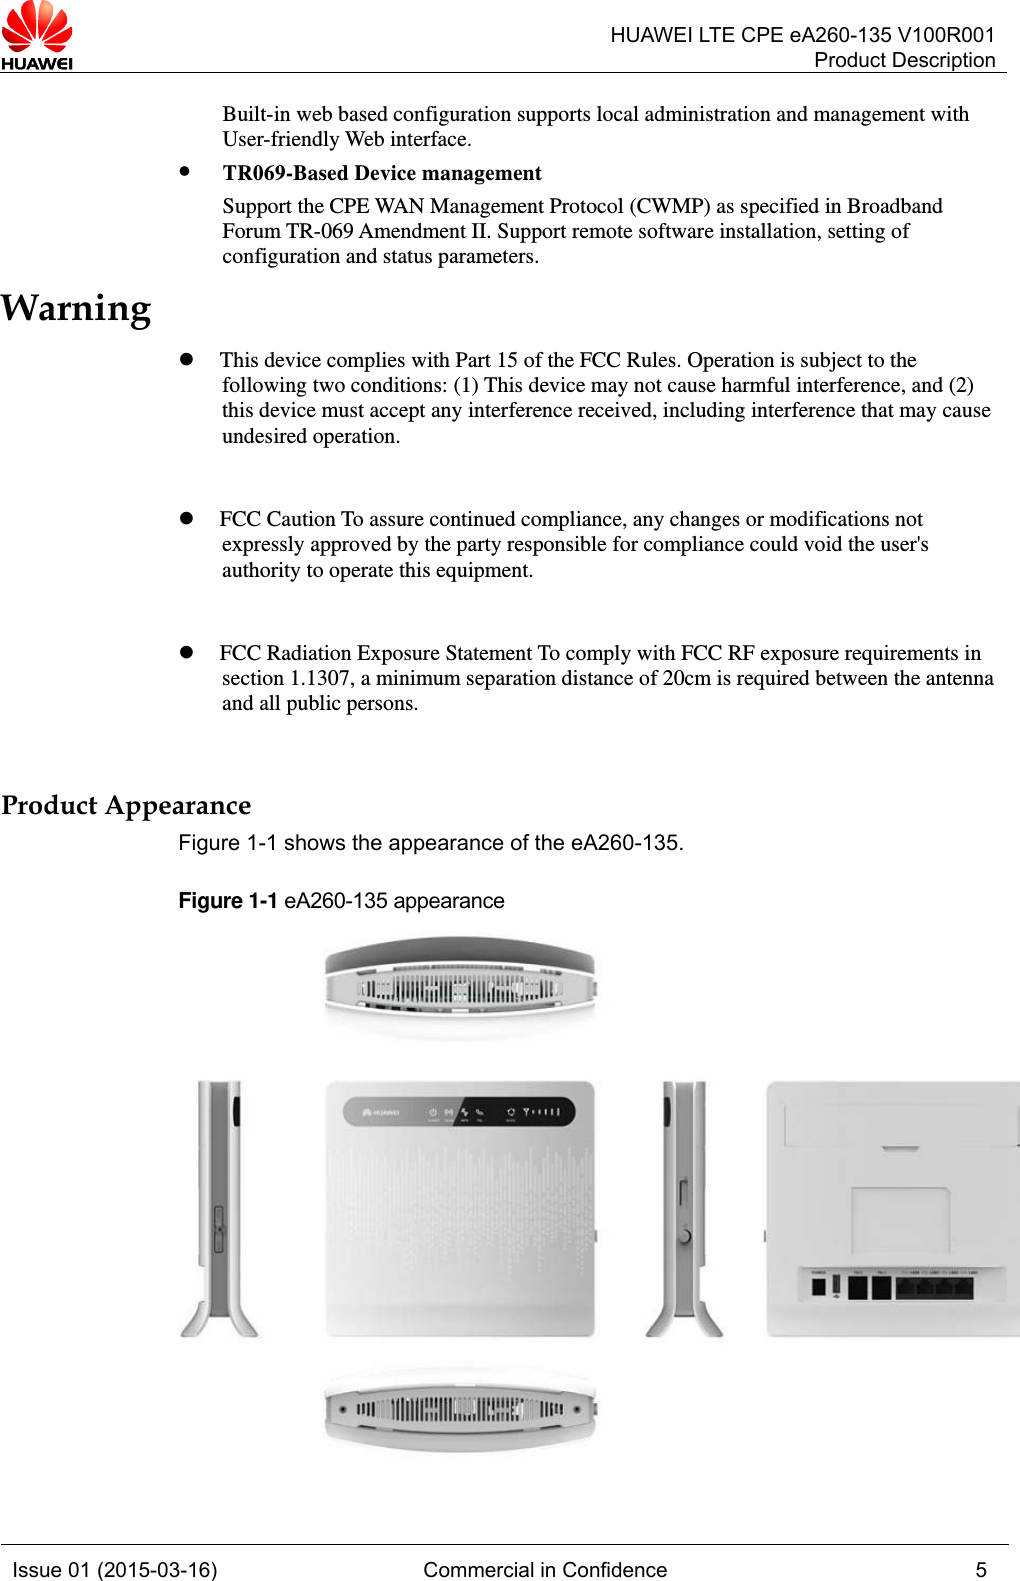  HUAWEI LTE CPE eA260-135 V100R001Product Description Issue 01 (2015-03-16) Commercial in Confidence 5  Built-in web based configuration supports local administration and management with User-friendly Web interface. z TR069-Based Device management Support the CPE WAN Management Protocol (CWMP) as specified in Broadband Forum TR-069 Amendment II. Support remote software installation, setting of configuration and status parameters. Warning z This device complies with Part 15 of the FCC Rules. Operation is subject to the following two conditions: (1) This device may not cause harmful interference, and (2) this device must accept any interference received, including interference that may cause undesired operation.    z FCC Caution To assure continued compliance, any changes or modifications not expressly approved by the party responsible for compliance could void the user&apos;s authority to operate this equipment.  z FCC Radiation Exposure Statement To comply with FCC RF exposure requirements in section 1.1307, a minimum separation distance of 20cm is required between the antenna and all public persons.  Product Appearance Figure 1-1 shows the appearance of the eA260-135. Figure 1-1 eA260-135 appearance  